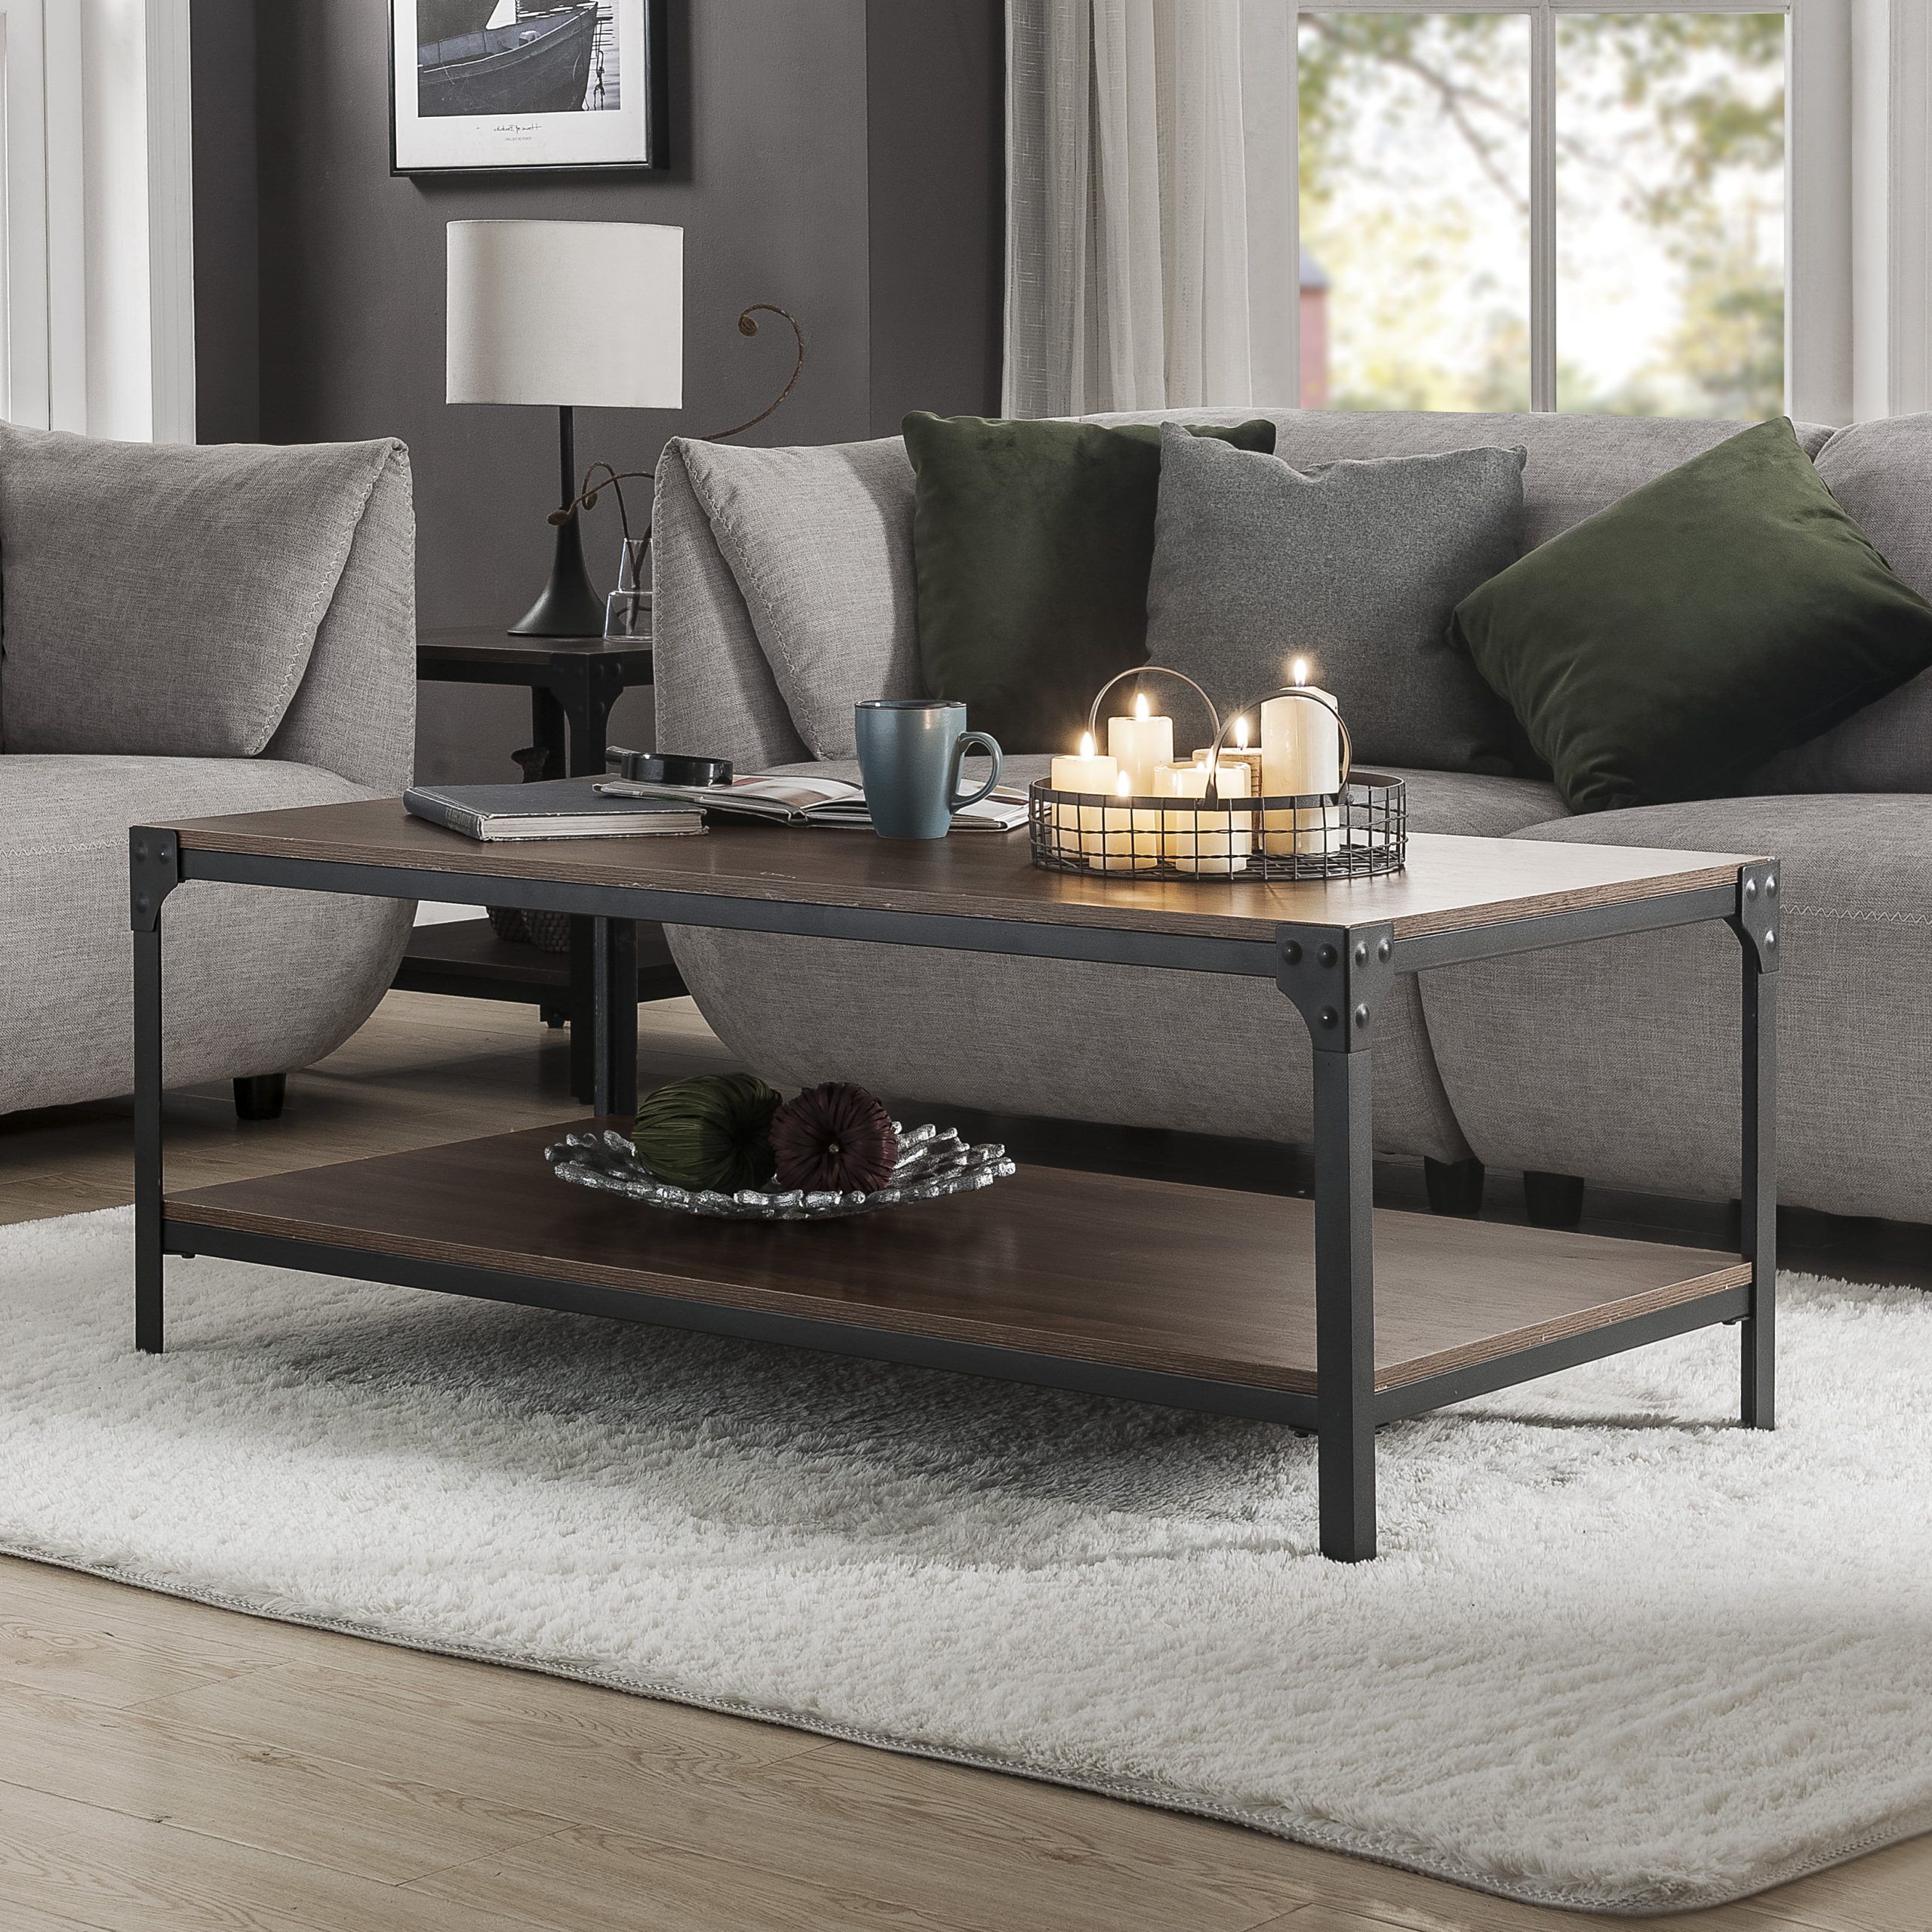 End Tables For Living Room, Mid Century Rustic Coffee Table With Inside Metal Side Tables For Living Spaces (View 11 of 20)